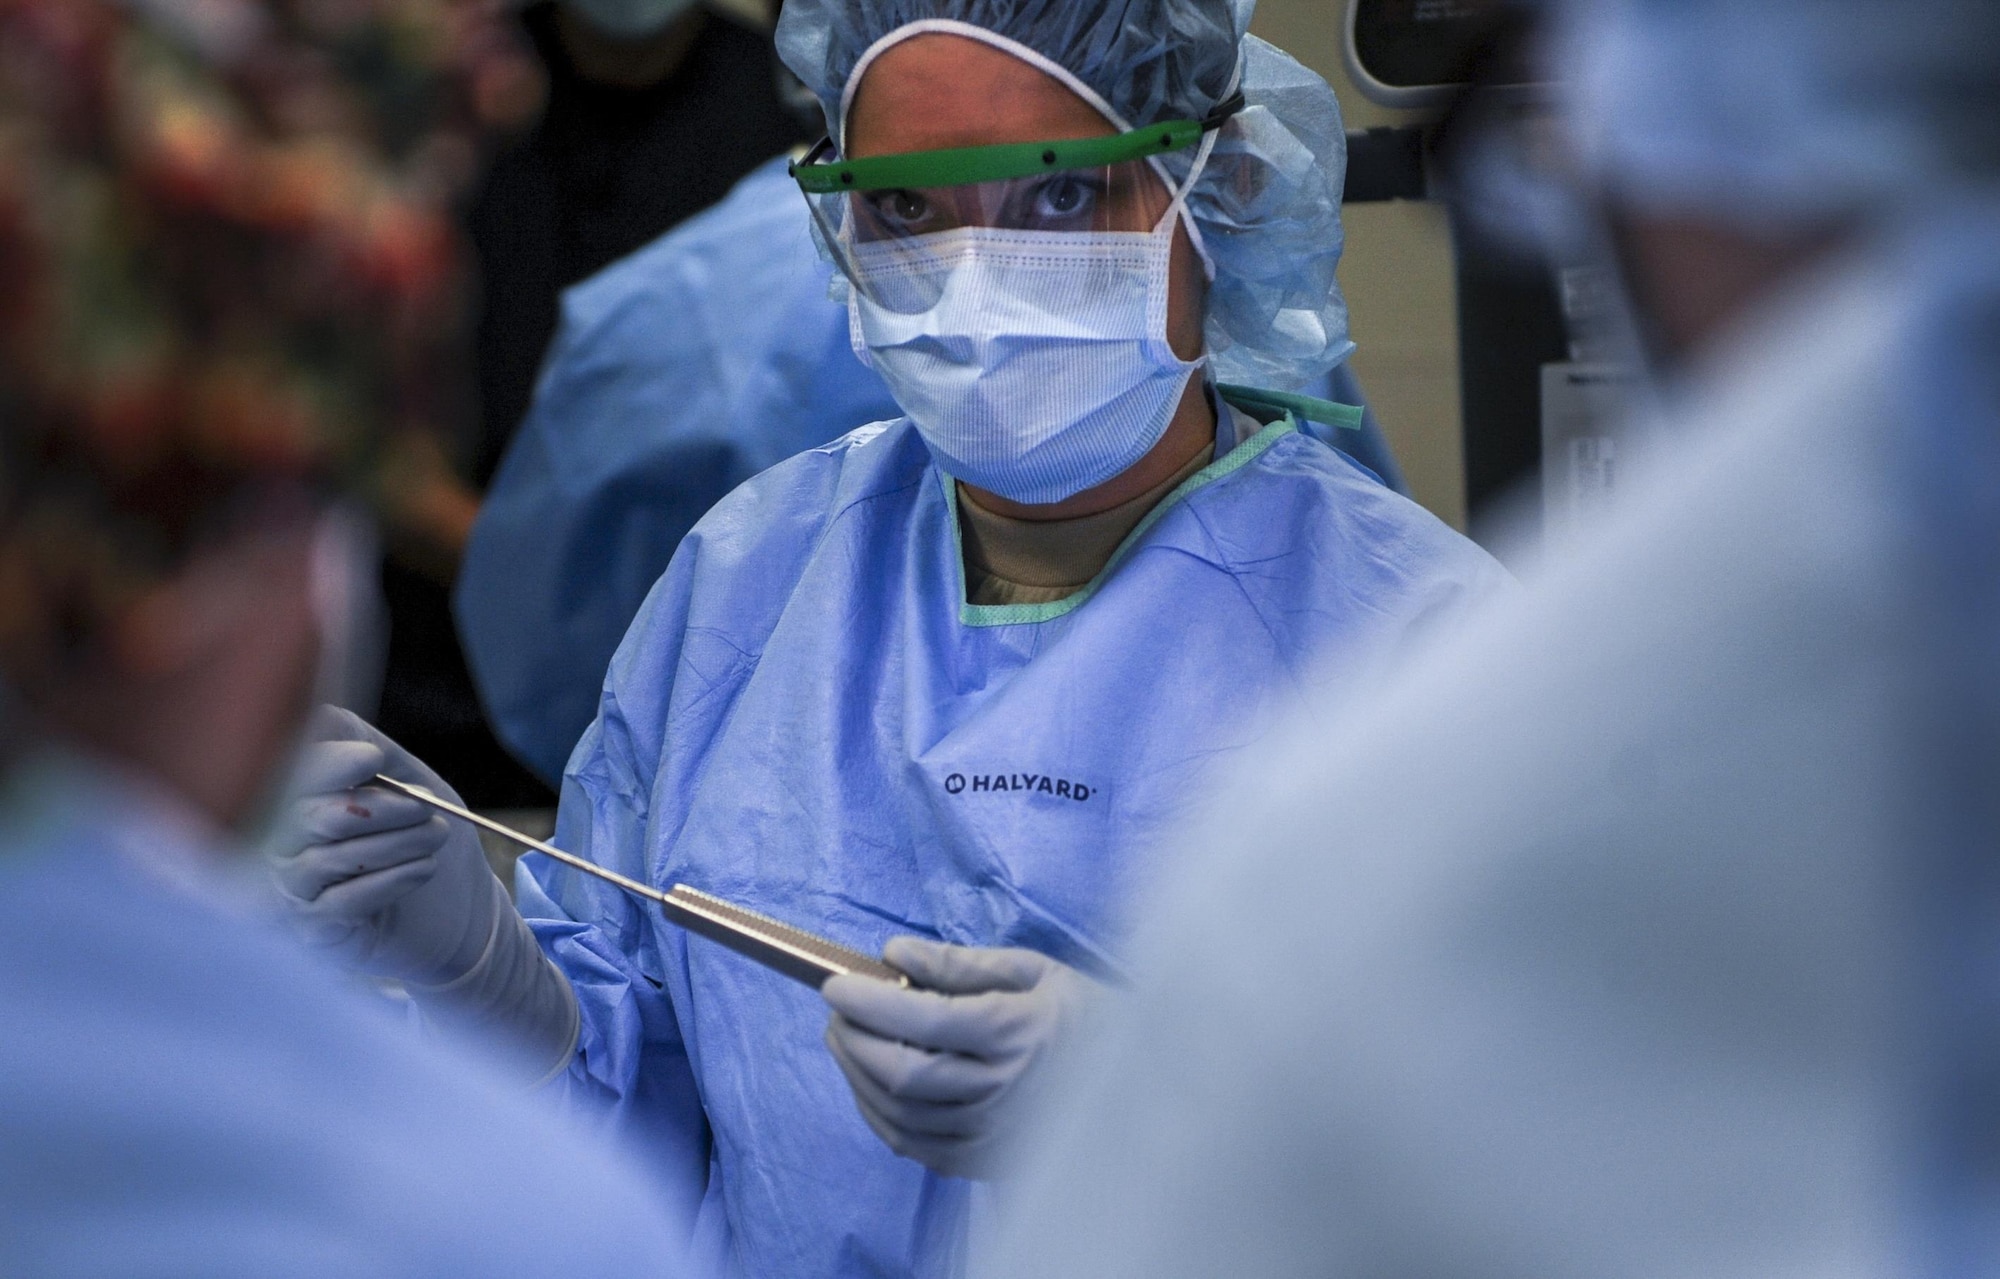 An Airman prepares to hand a surgical instrument to the surgeon during an ACL surgery at the Mike O’Callaghan Federal Medical Center at Nellis Air Force Base, Nev., Oct. 17, 2016. The orthopedics unit of the 99th Surgical Operations Squadron performs a variety of surgeries in order to help Airmen return to top-form after being injured. (U.S. Air Force photo by Airman 1st Class Kevin Tanenbaum/Released)